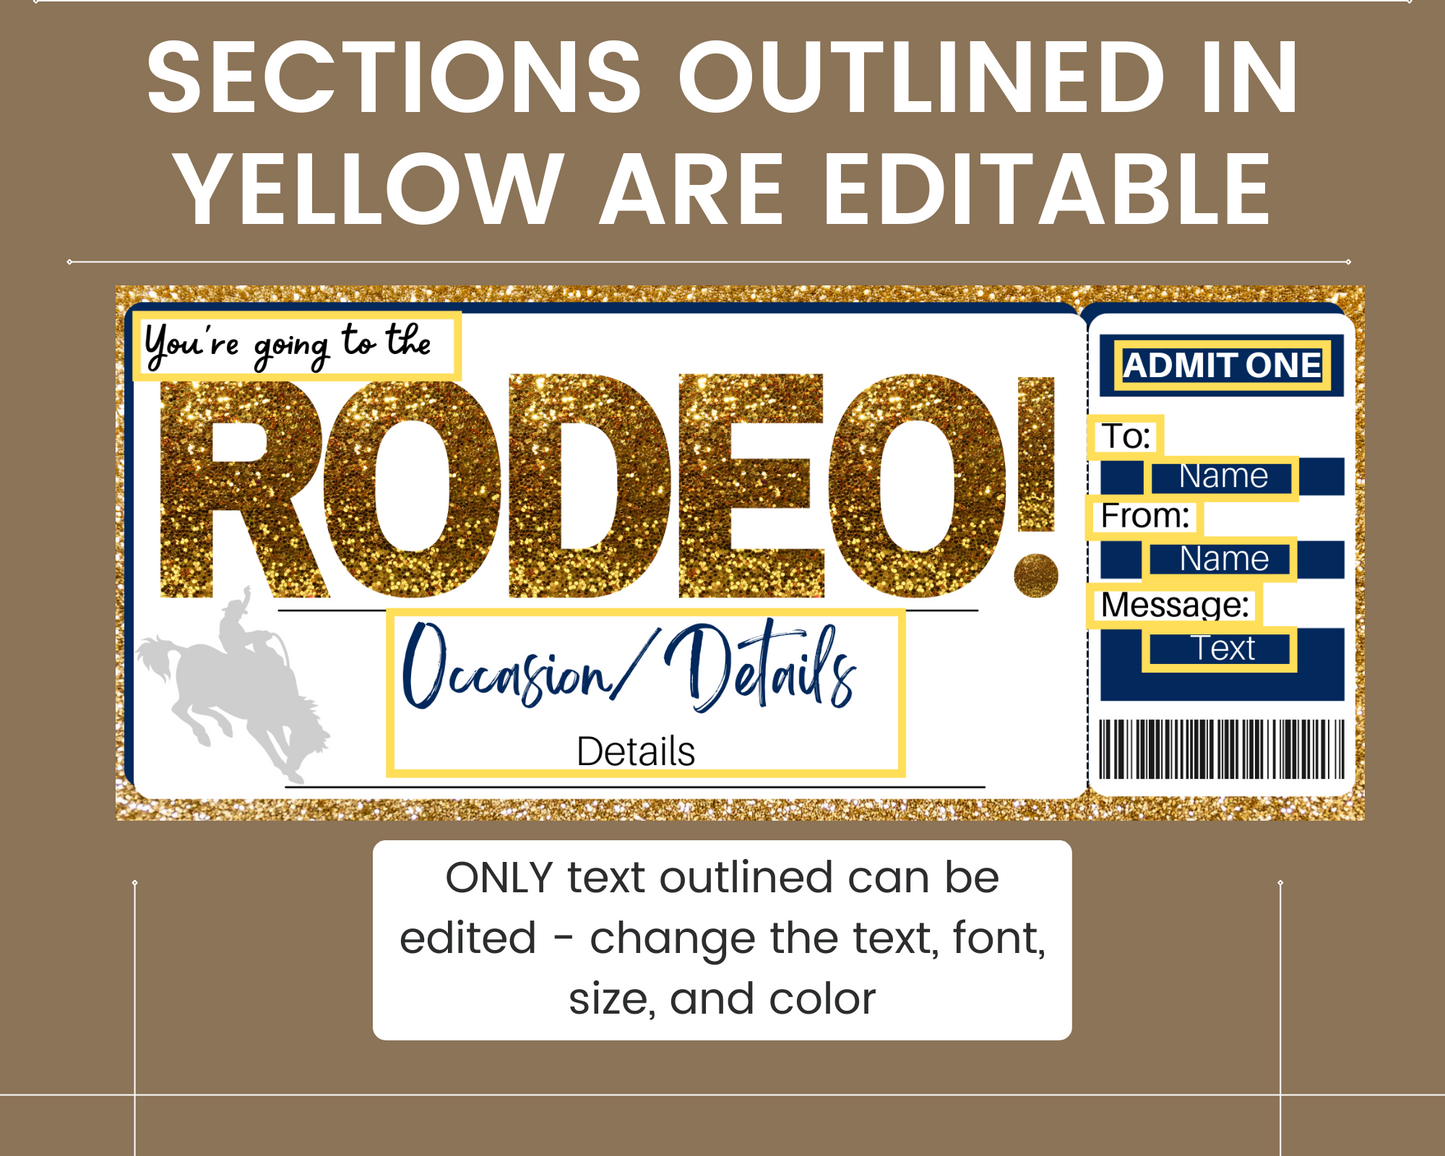 Rodeo Gift Ticket Template